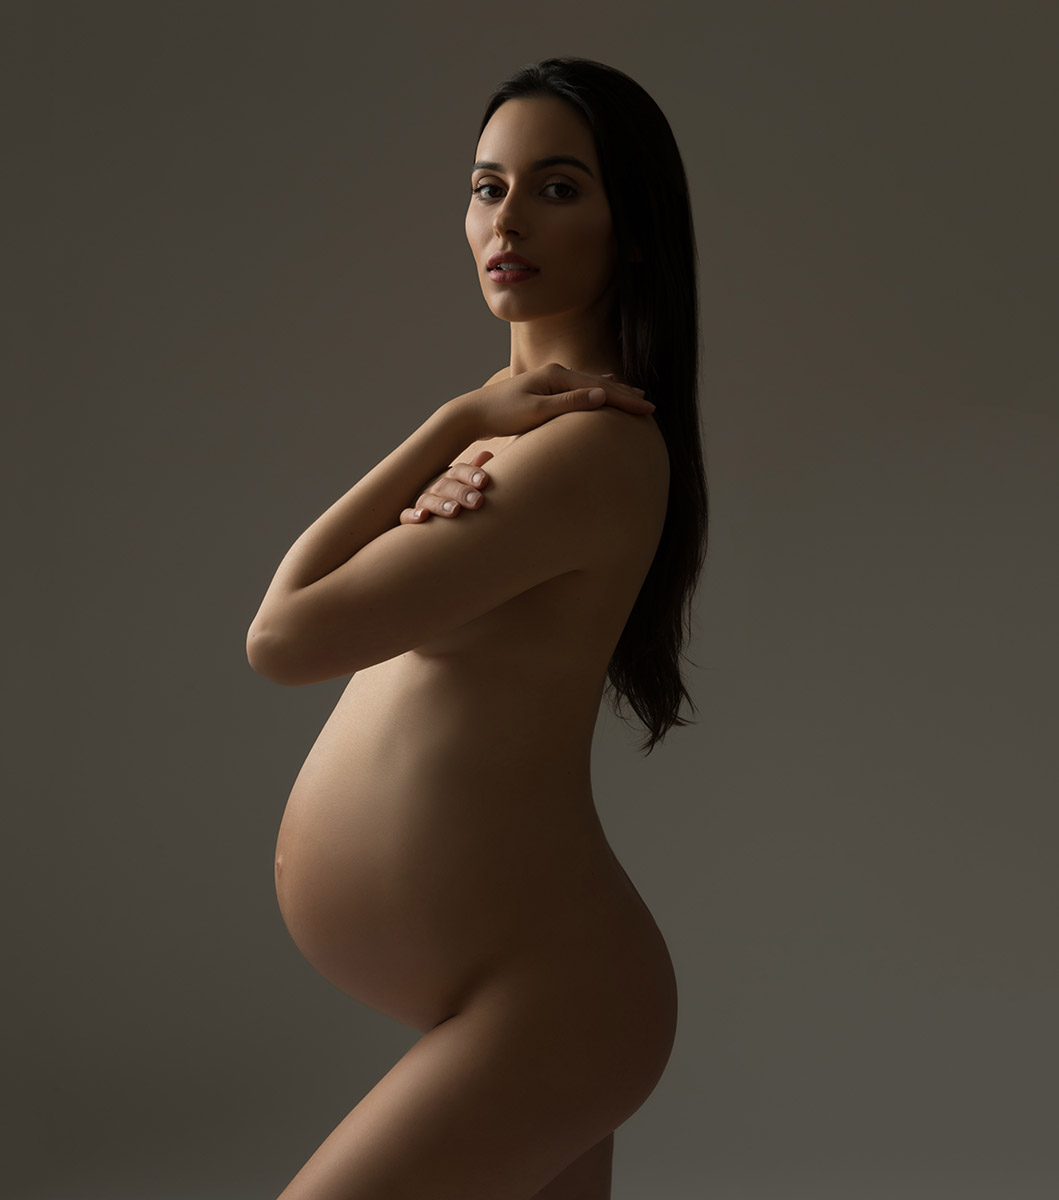 NYC Maternity Photographer captures a stunning topless pregnancy portrait